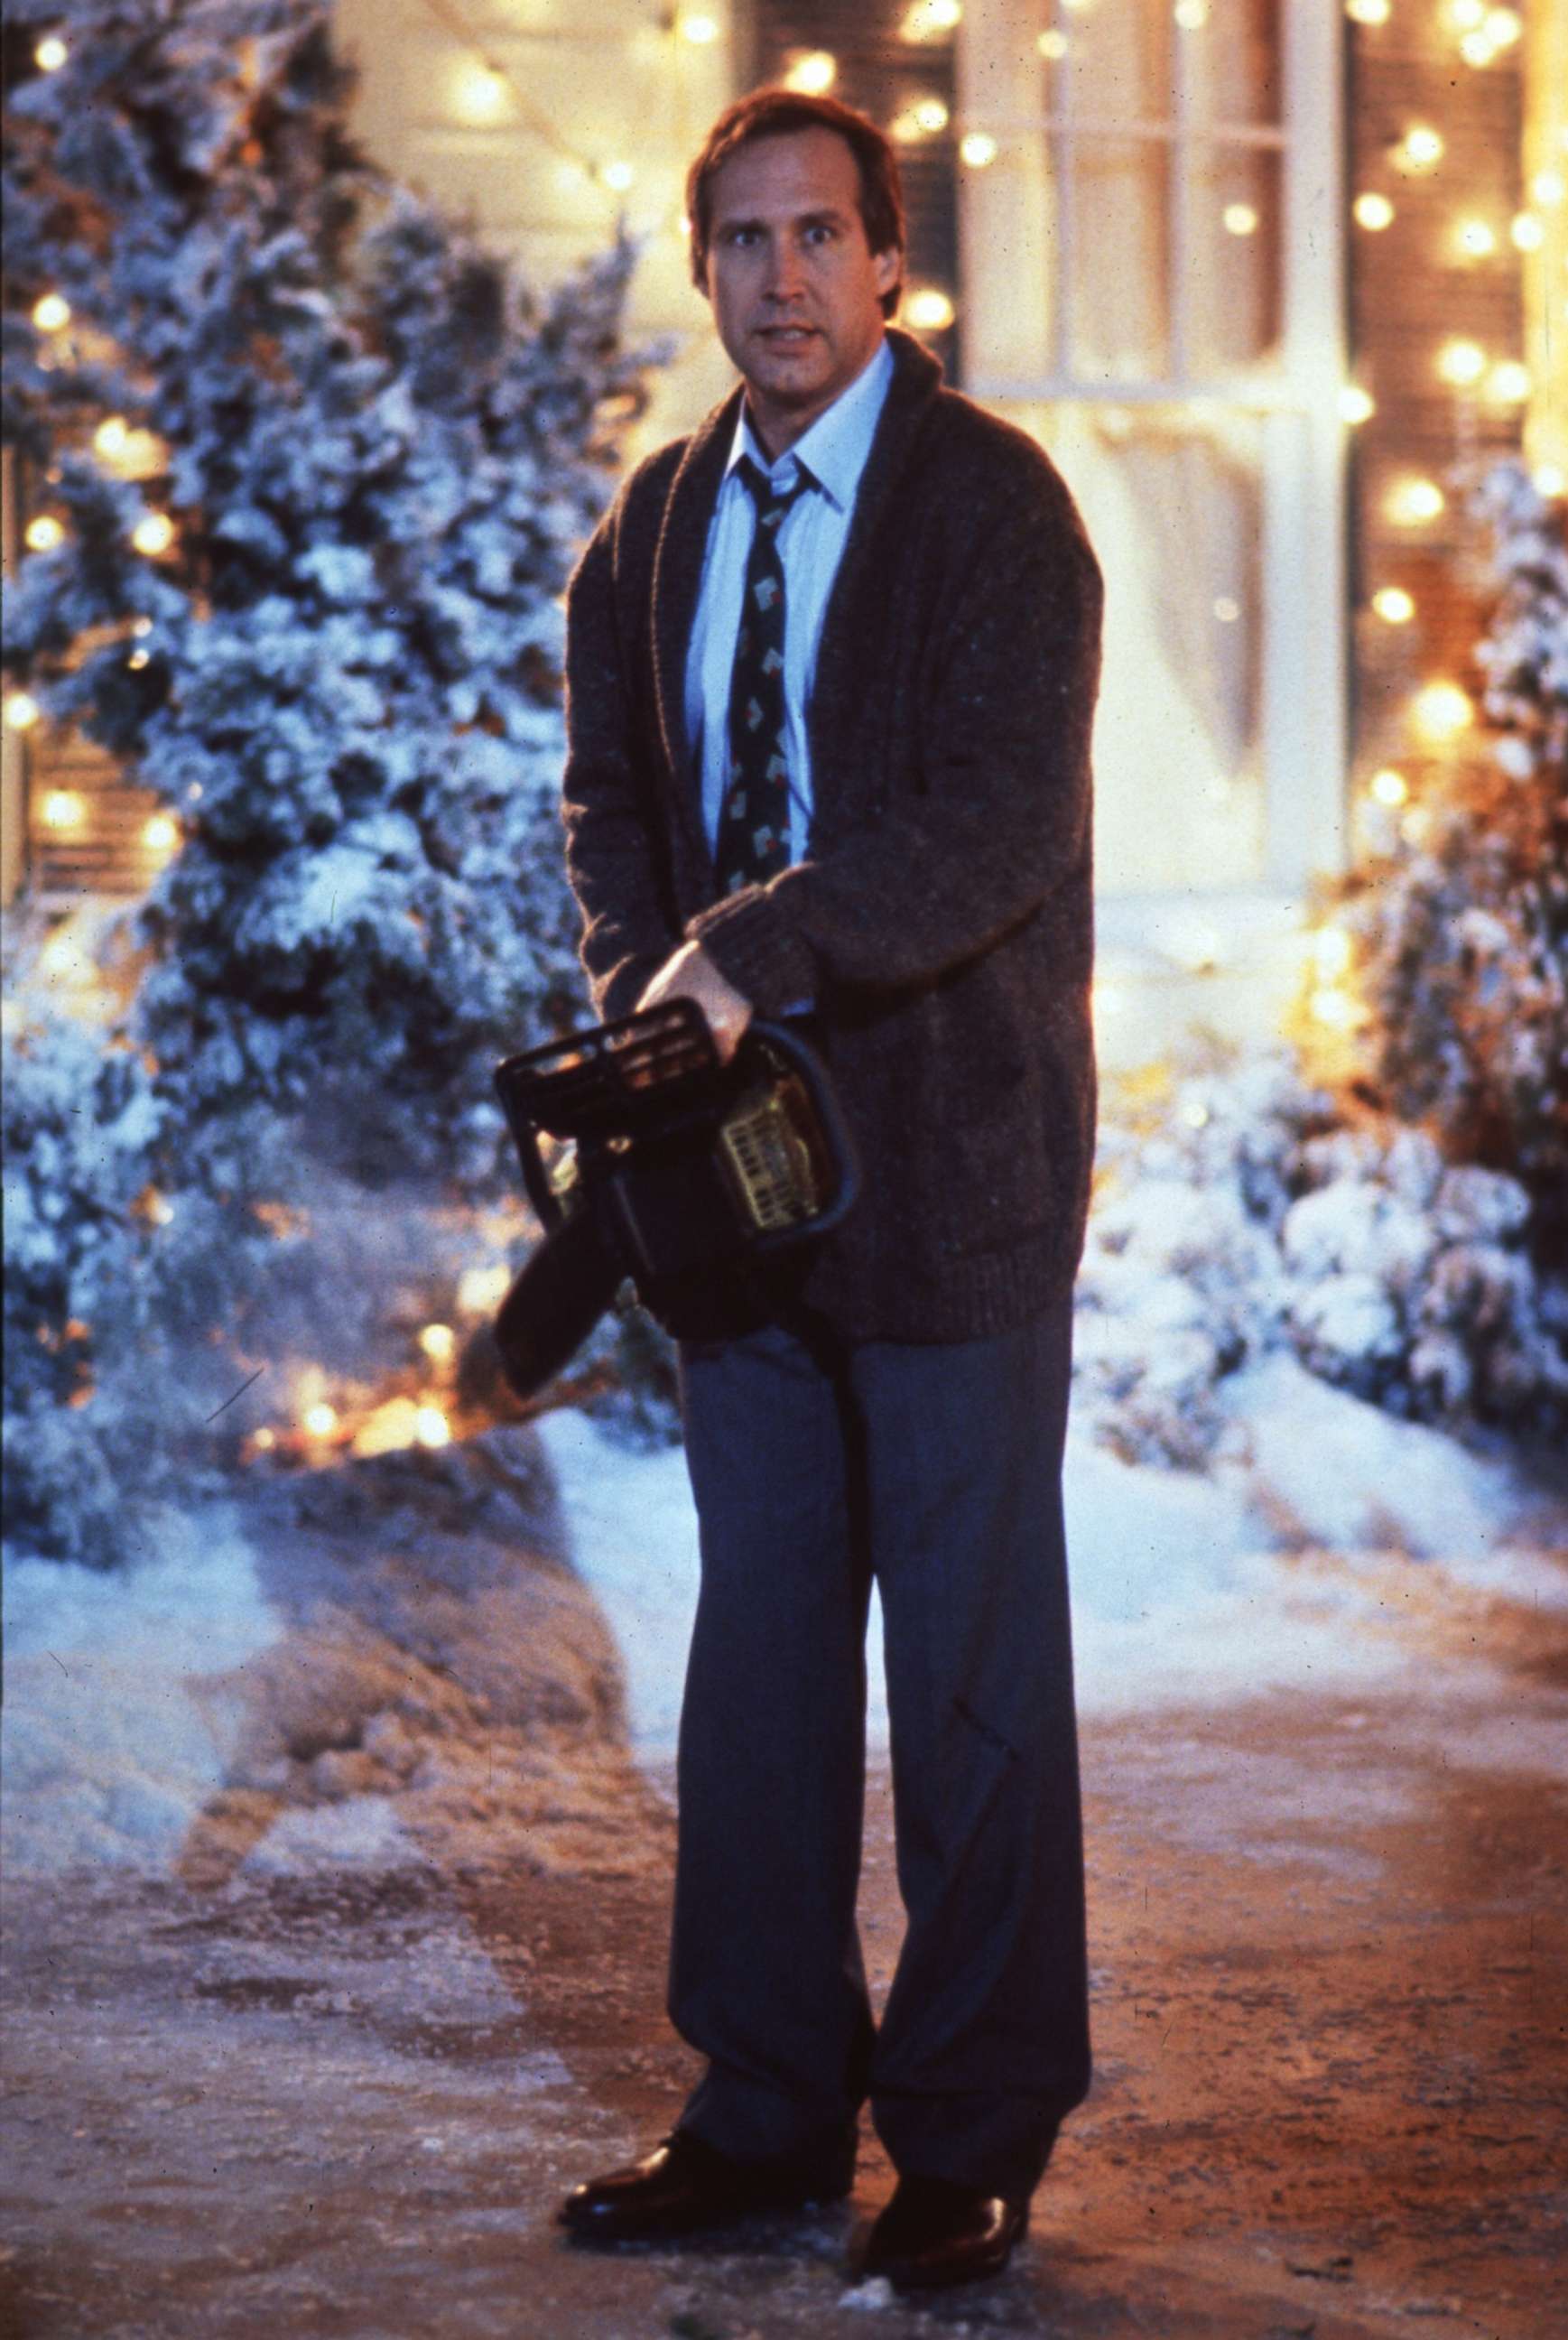 PHOTO: Chevy Chase as Clark Griswold in "National Lampoon's Christmas Vacation," 1989.